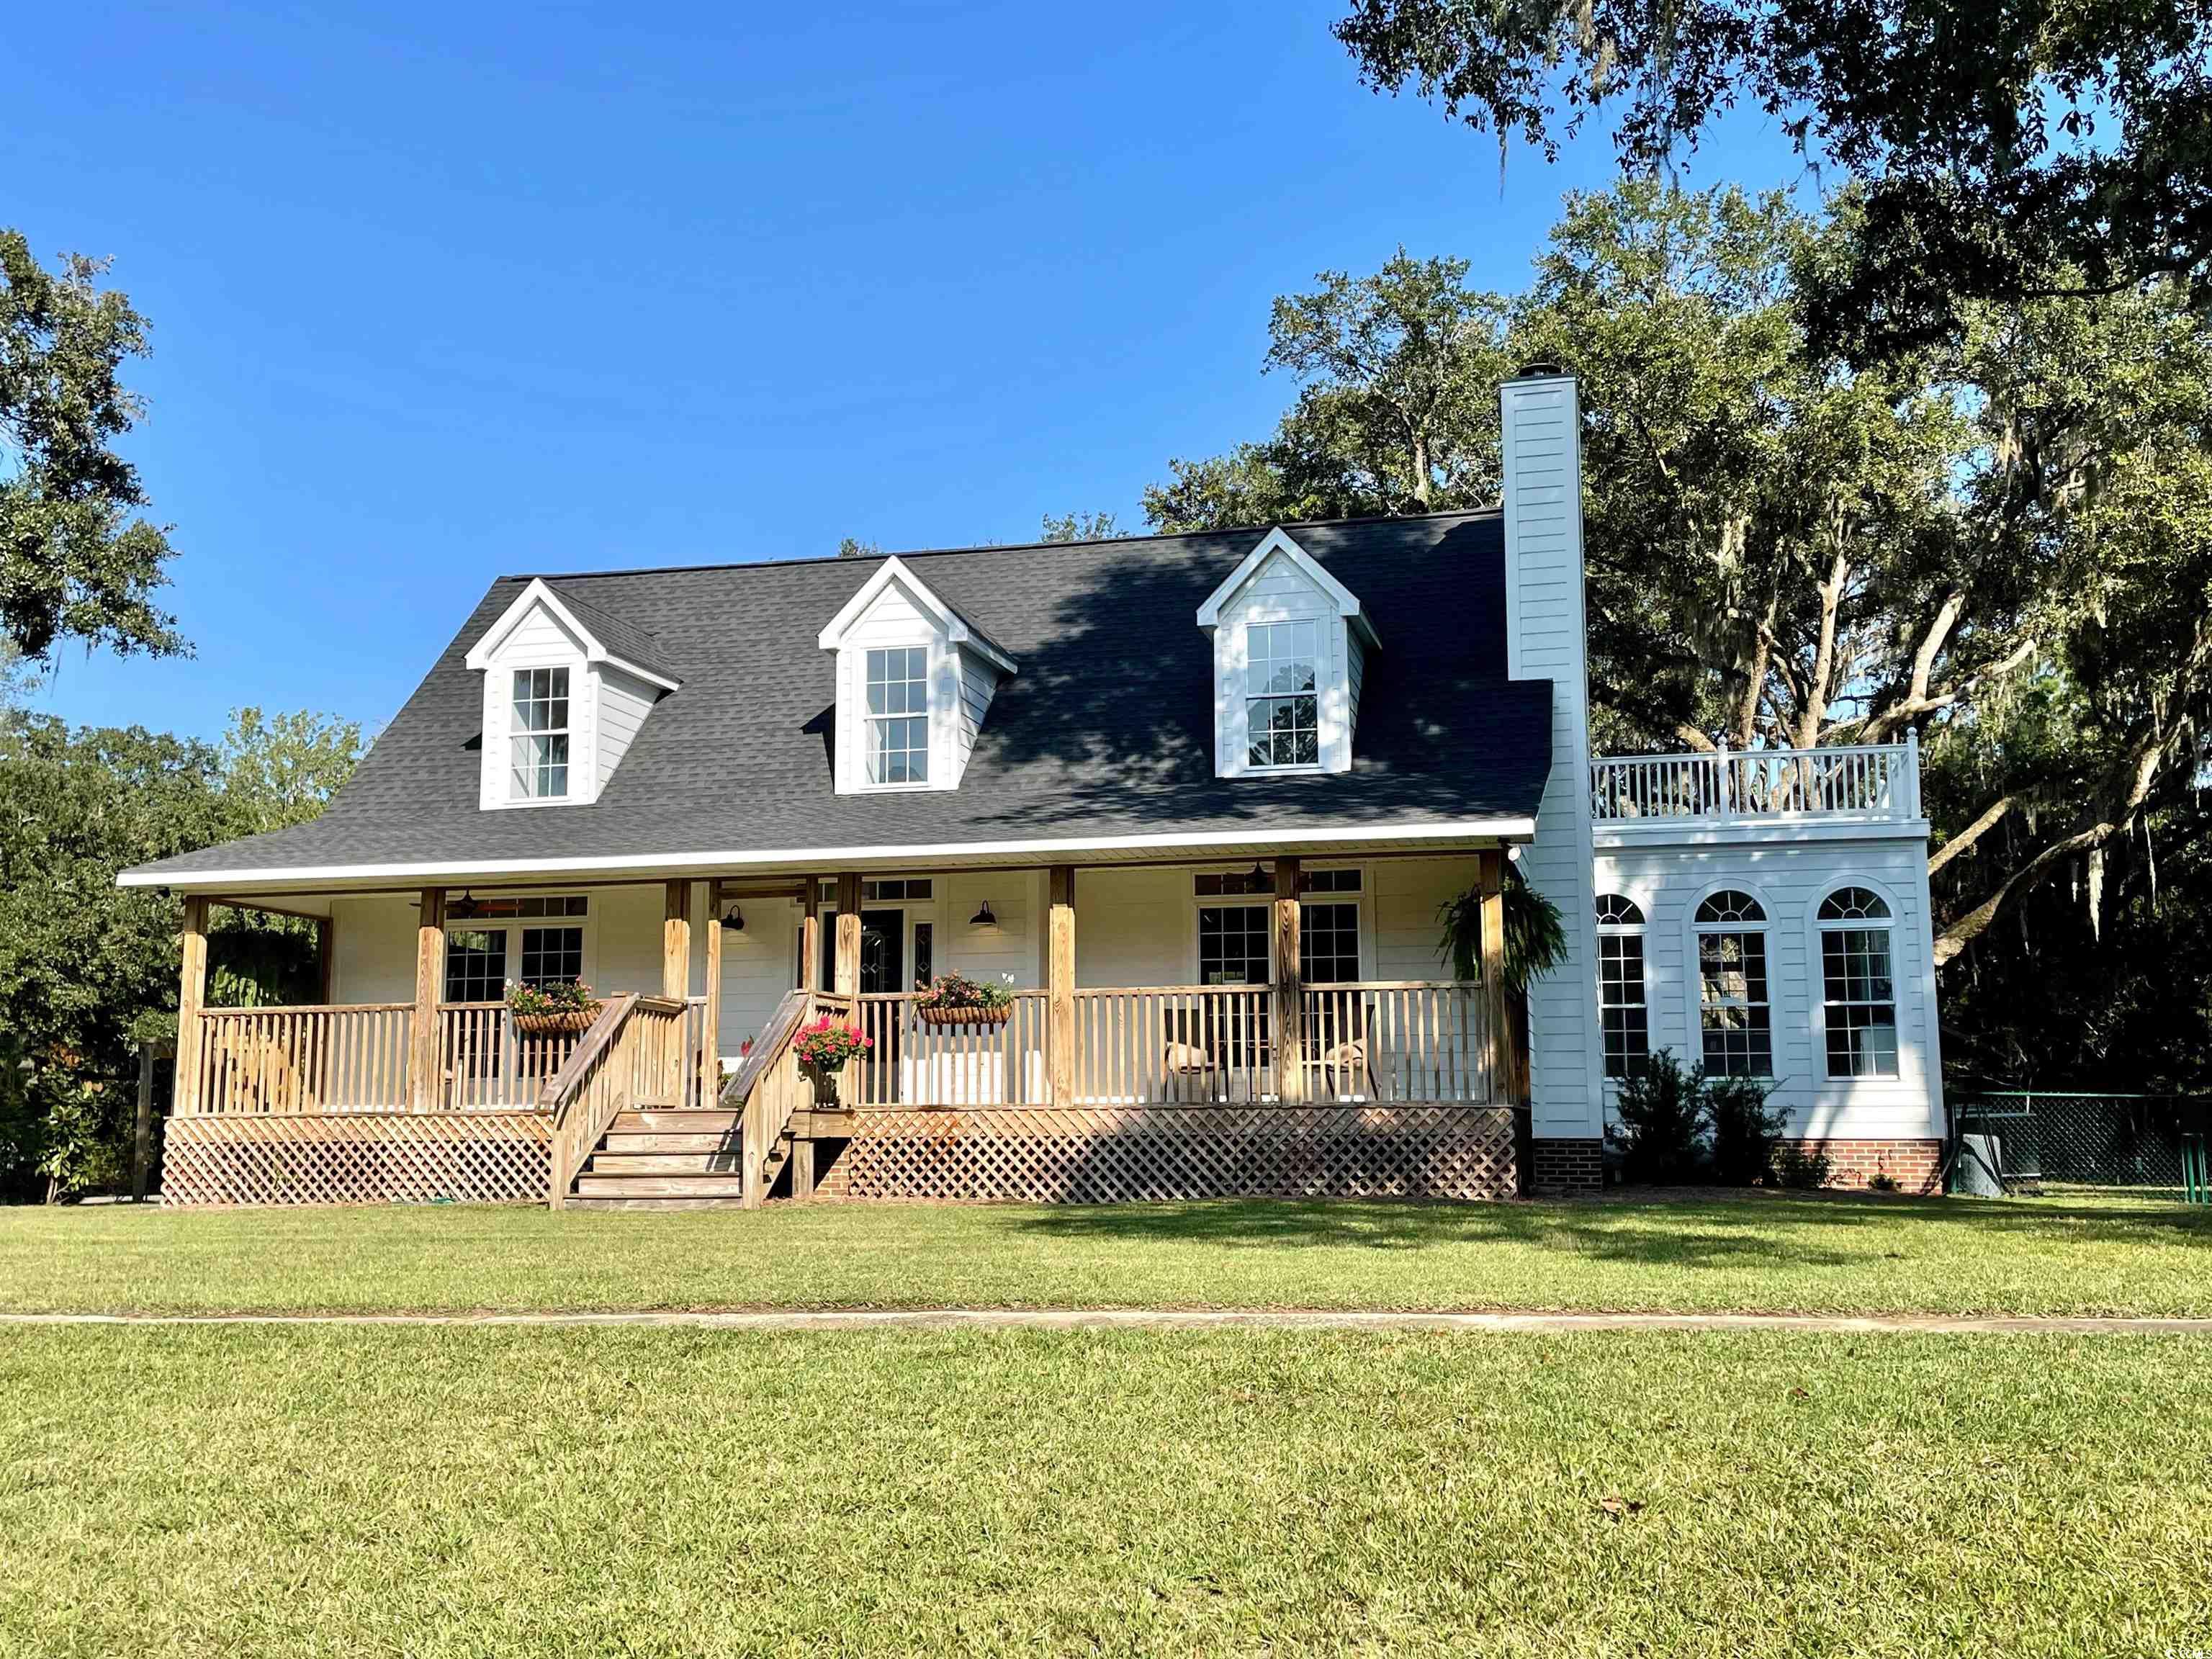 spectacular old live oaks and mature palms tower over a beautiful fully remodeled low country home in the heart of pawleys island on a main riverfront channel with direct access to the intracoastal waterway; and not in a flood plain.  this property is located just north of the original all saints church off kings river road and remains to boast the history of "days gone by."  the surrounding privacy and quietude presents a special residence that enjoys natural protection and a revered position along the waccamaw river - where a sense of adventure and expectation abounds.  new hardi plank siding, new roof, new flooring, new kitchen, all new appliances, plumbing and electrical; plus covered gazebo and a 30 foot long dock walkway.  come see for yourself to experience a unique awakening of your lowcountry imagination as this rare home ownership opportunity awaits!